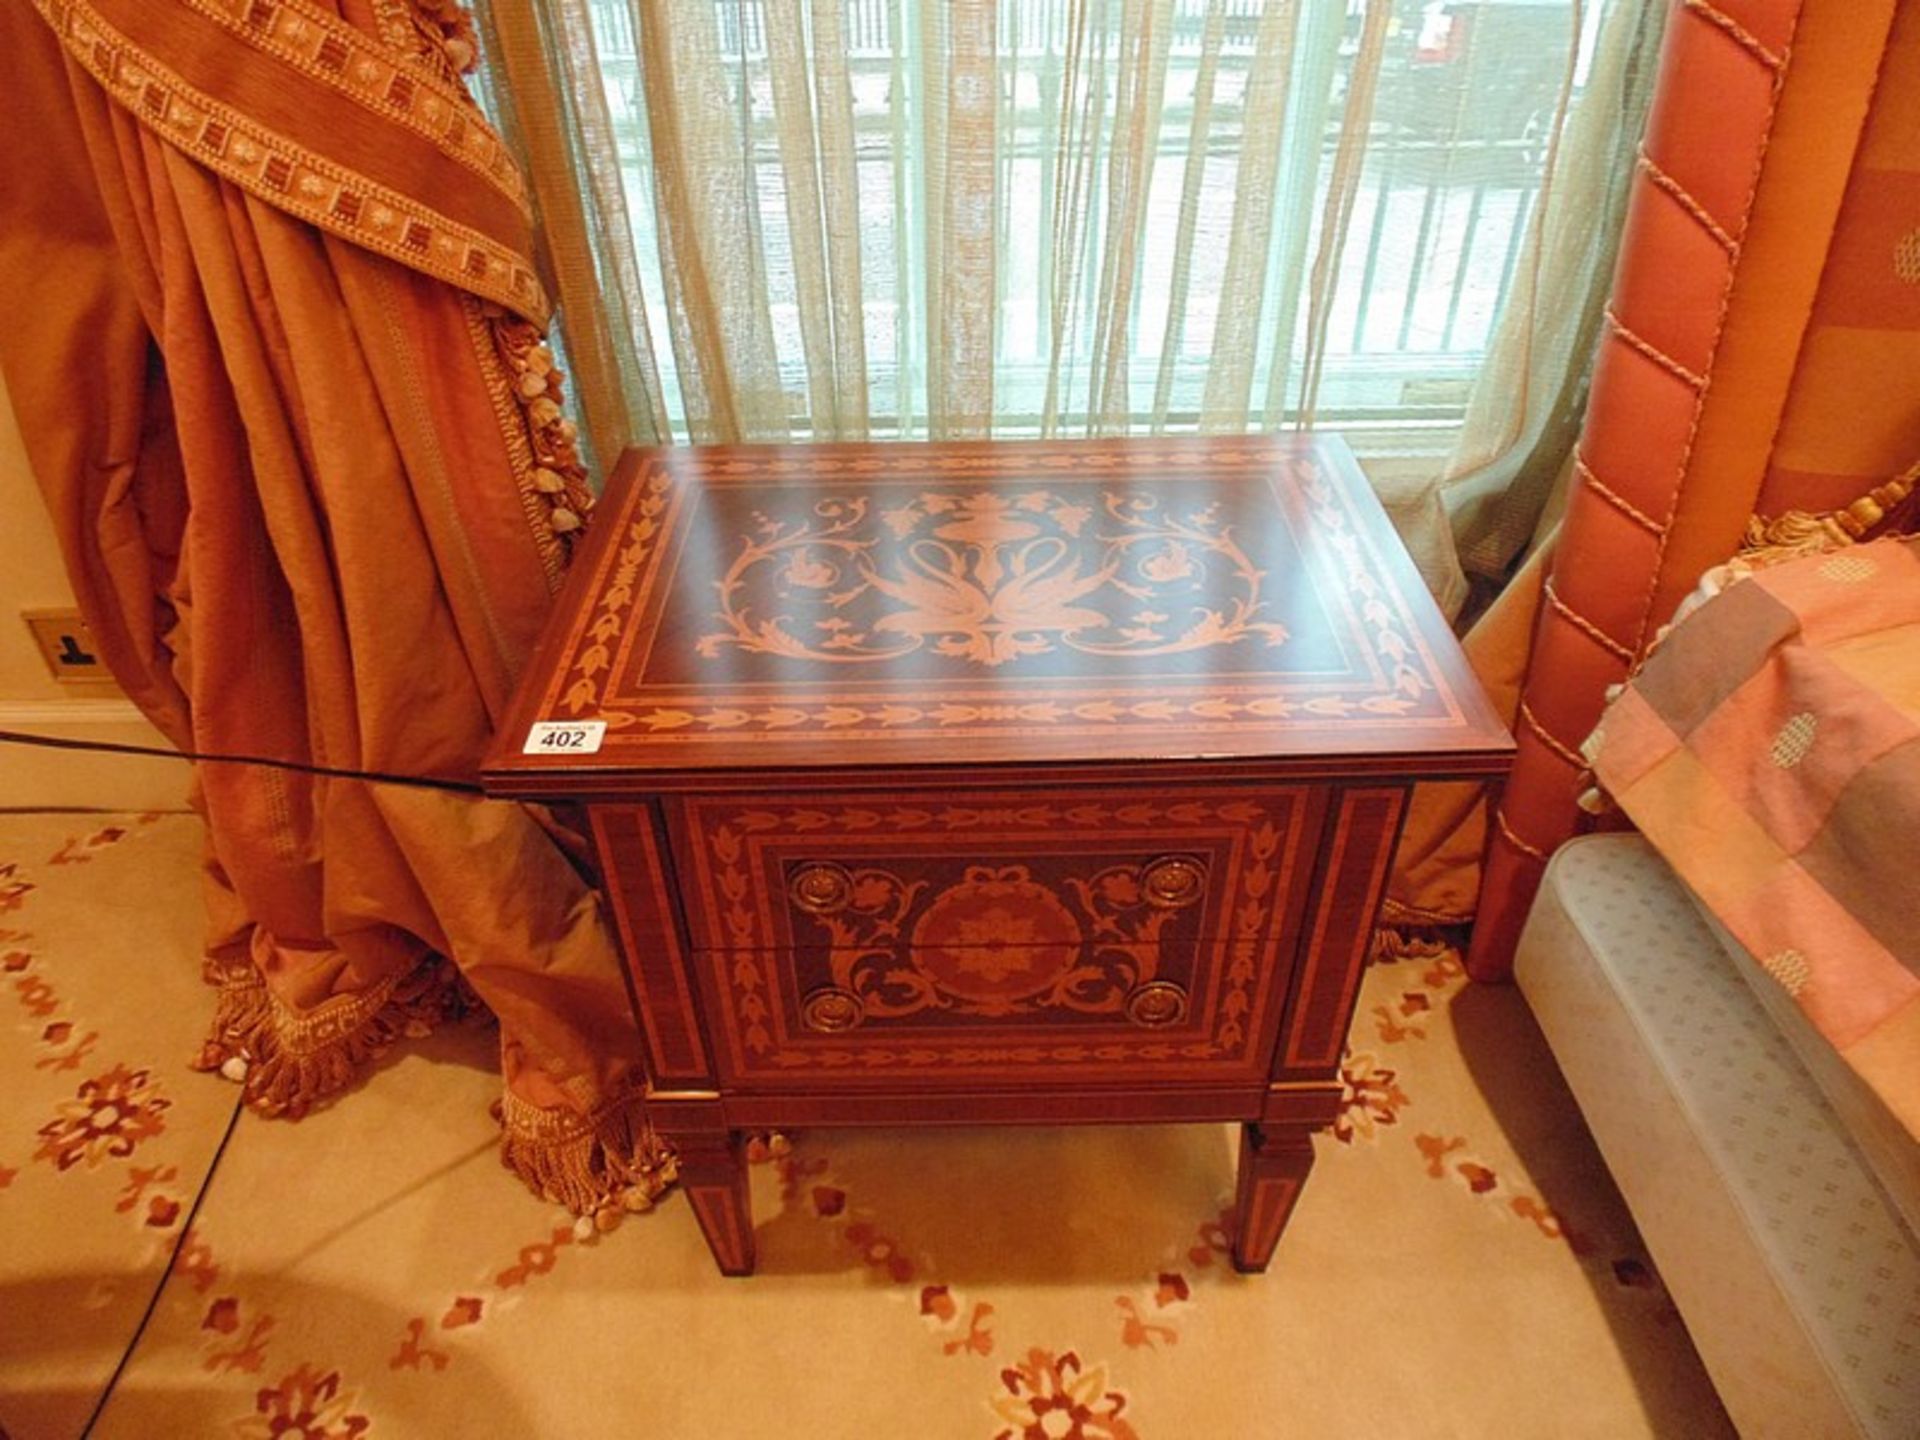 A fine pair of mid-19th century Italian style inlaid marquetry commodes with a single drawer over